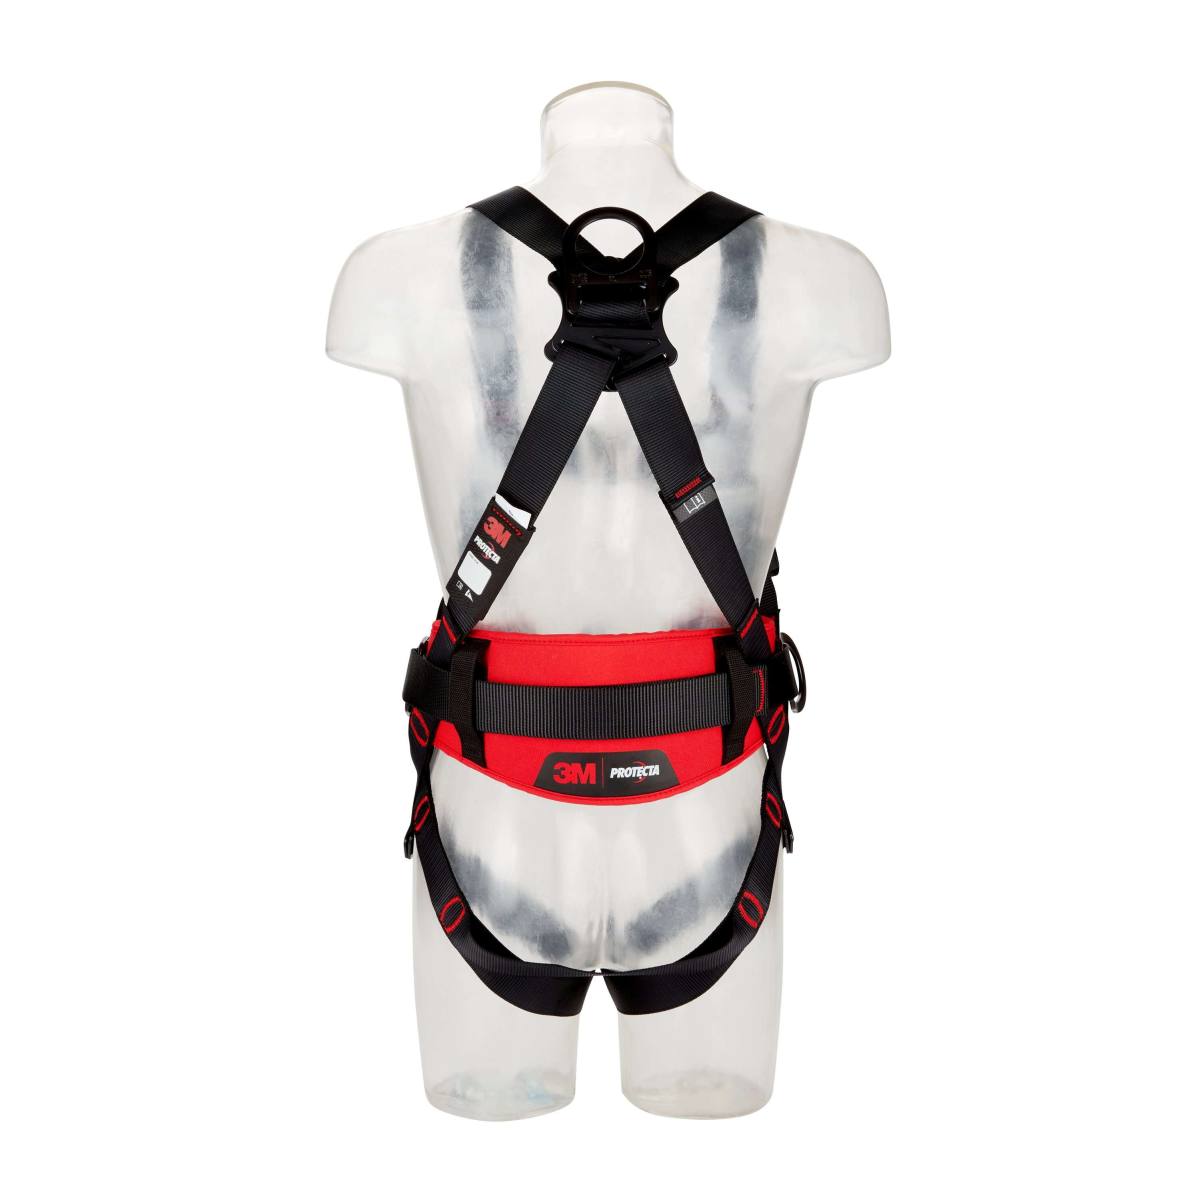  3M PROTECTA Full body harness - chest and rear fall arrest eyelets, comfort harness with side attachment points, standard VS, chest and rear fall indicators, harness end depot, label protector with labelling field, black-coated coating, M/L